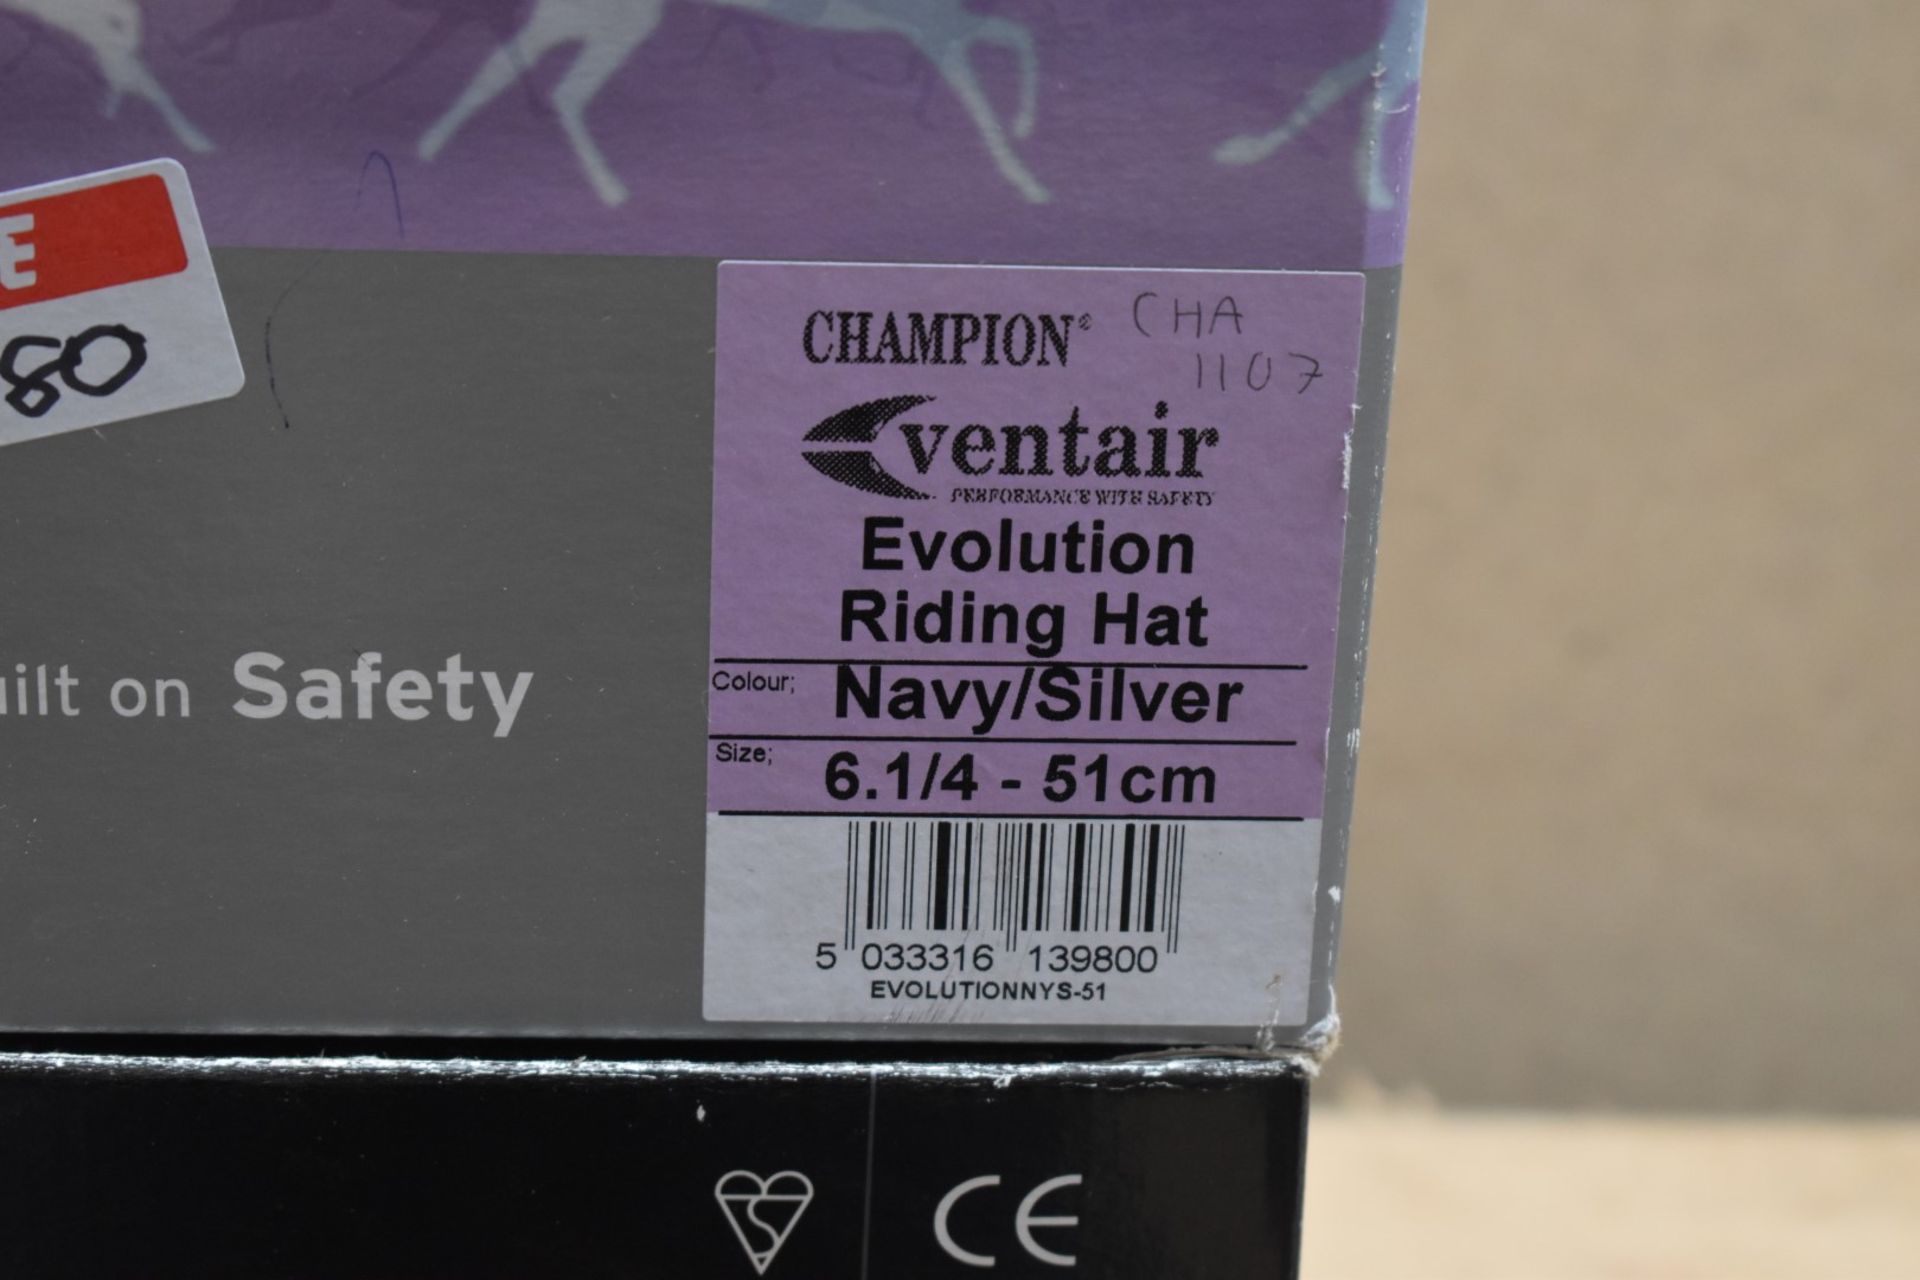 4 x Champion Ventair Evolution Horse Riding Hats - Various Sizes and Colours Included - Unused Boxed - Image 6 of 11